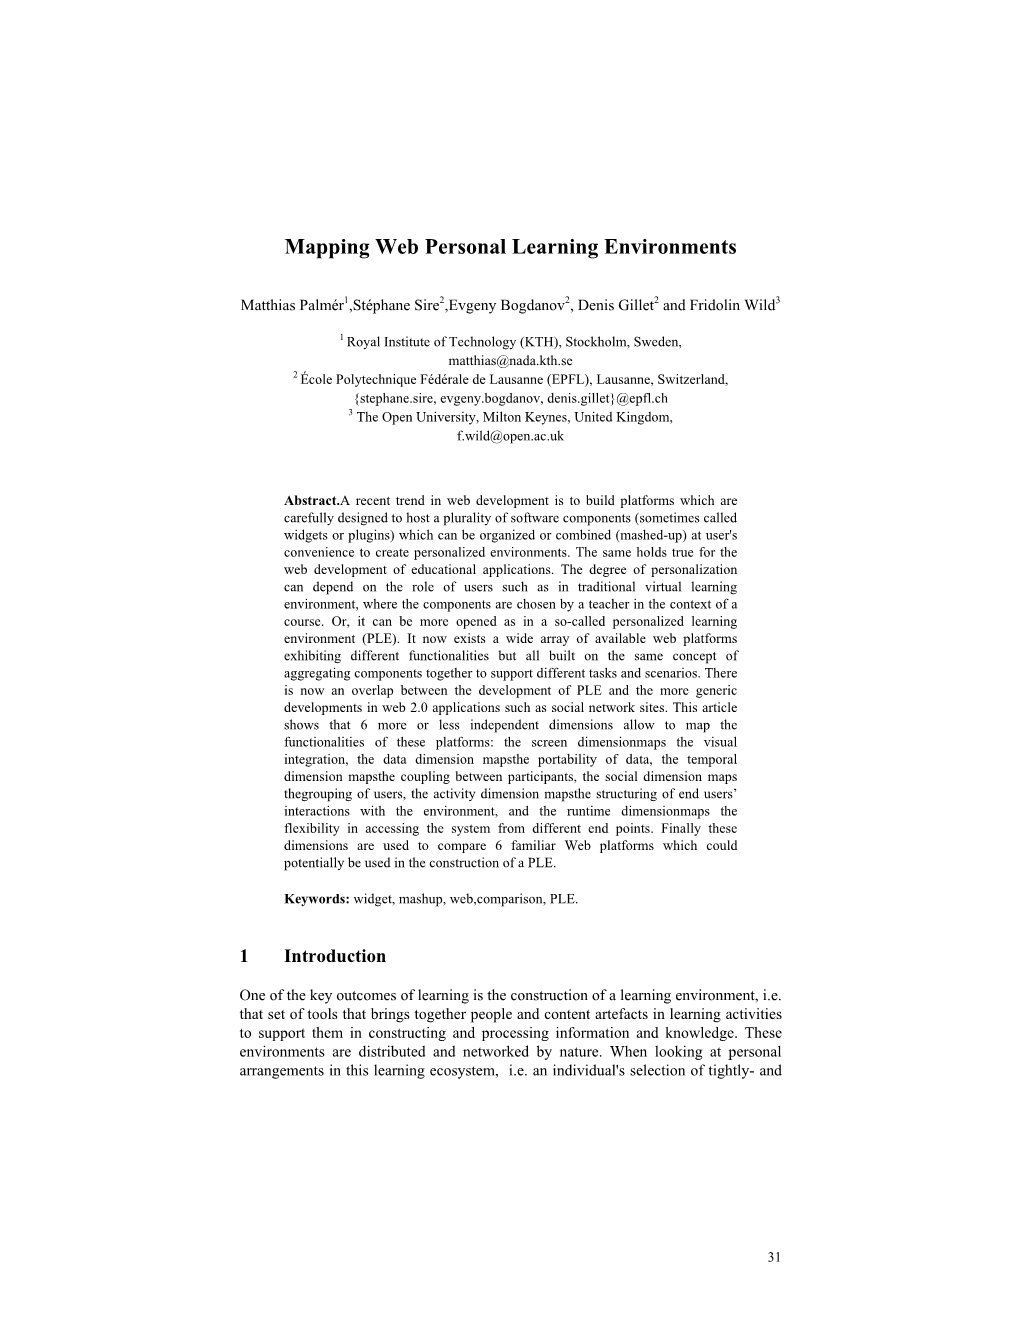 Mapping Web Personal Learning Environments